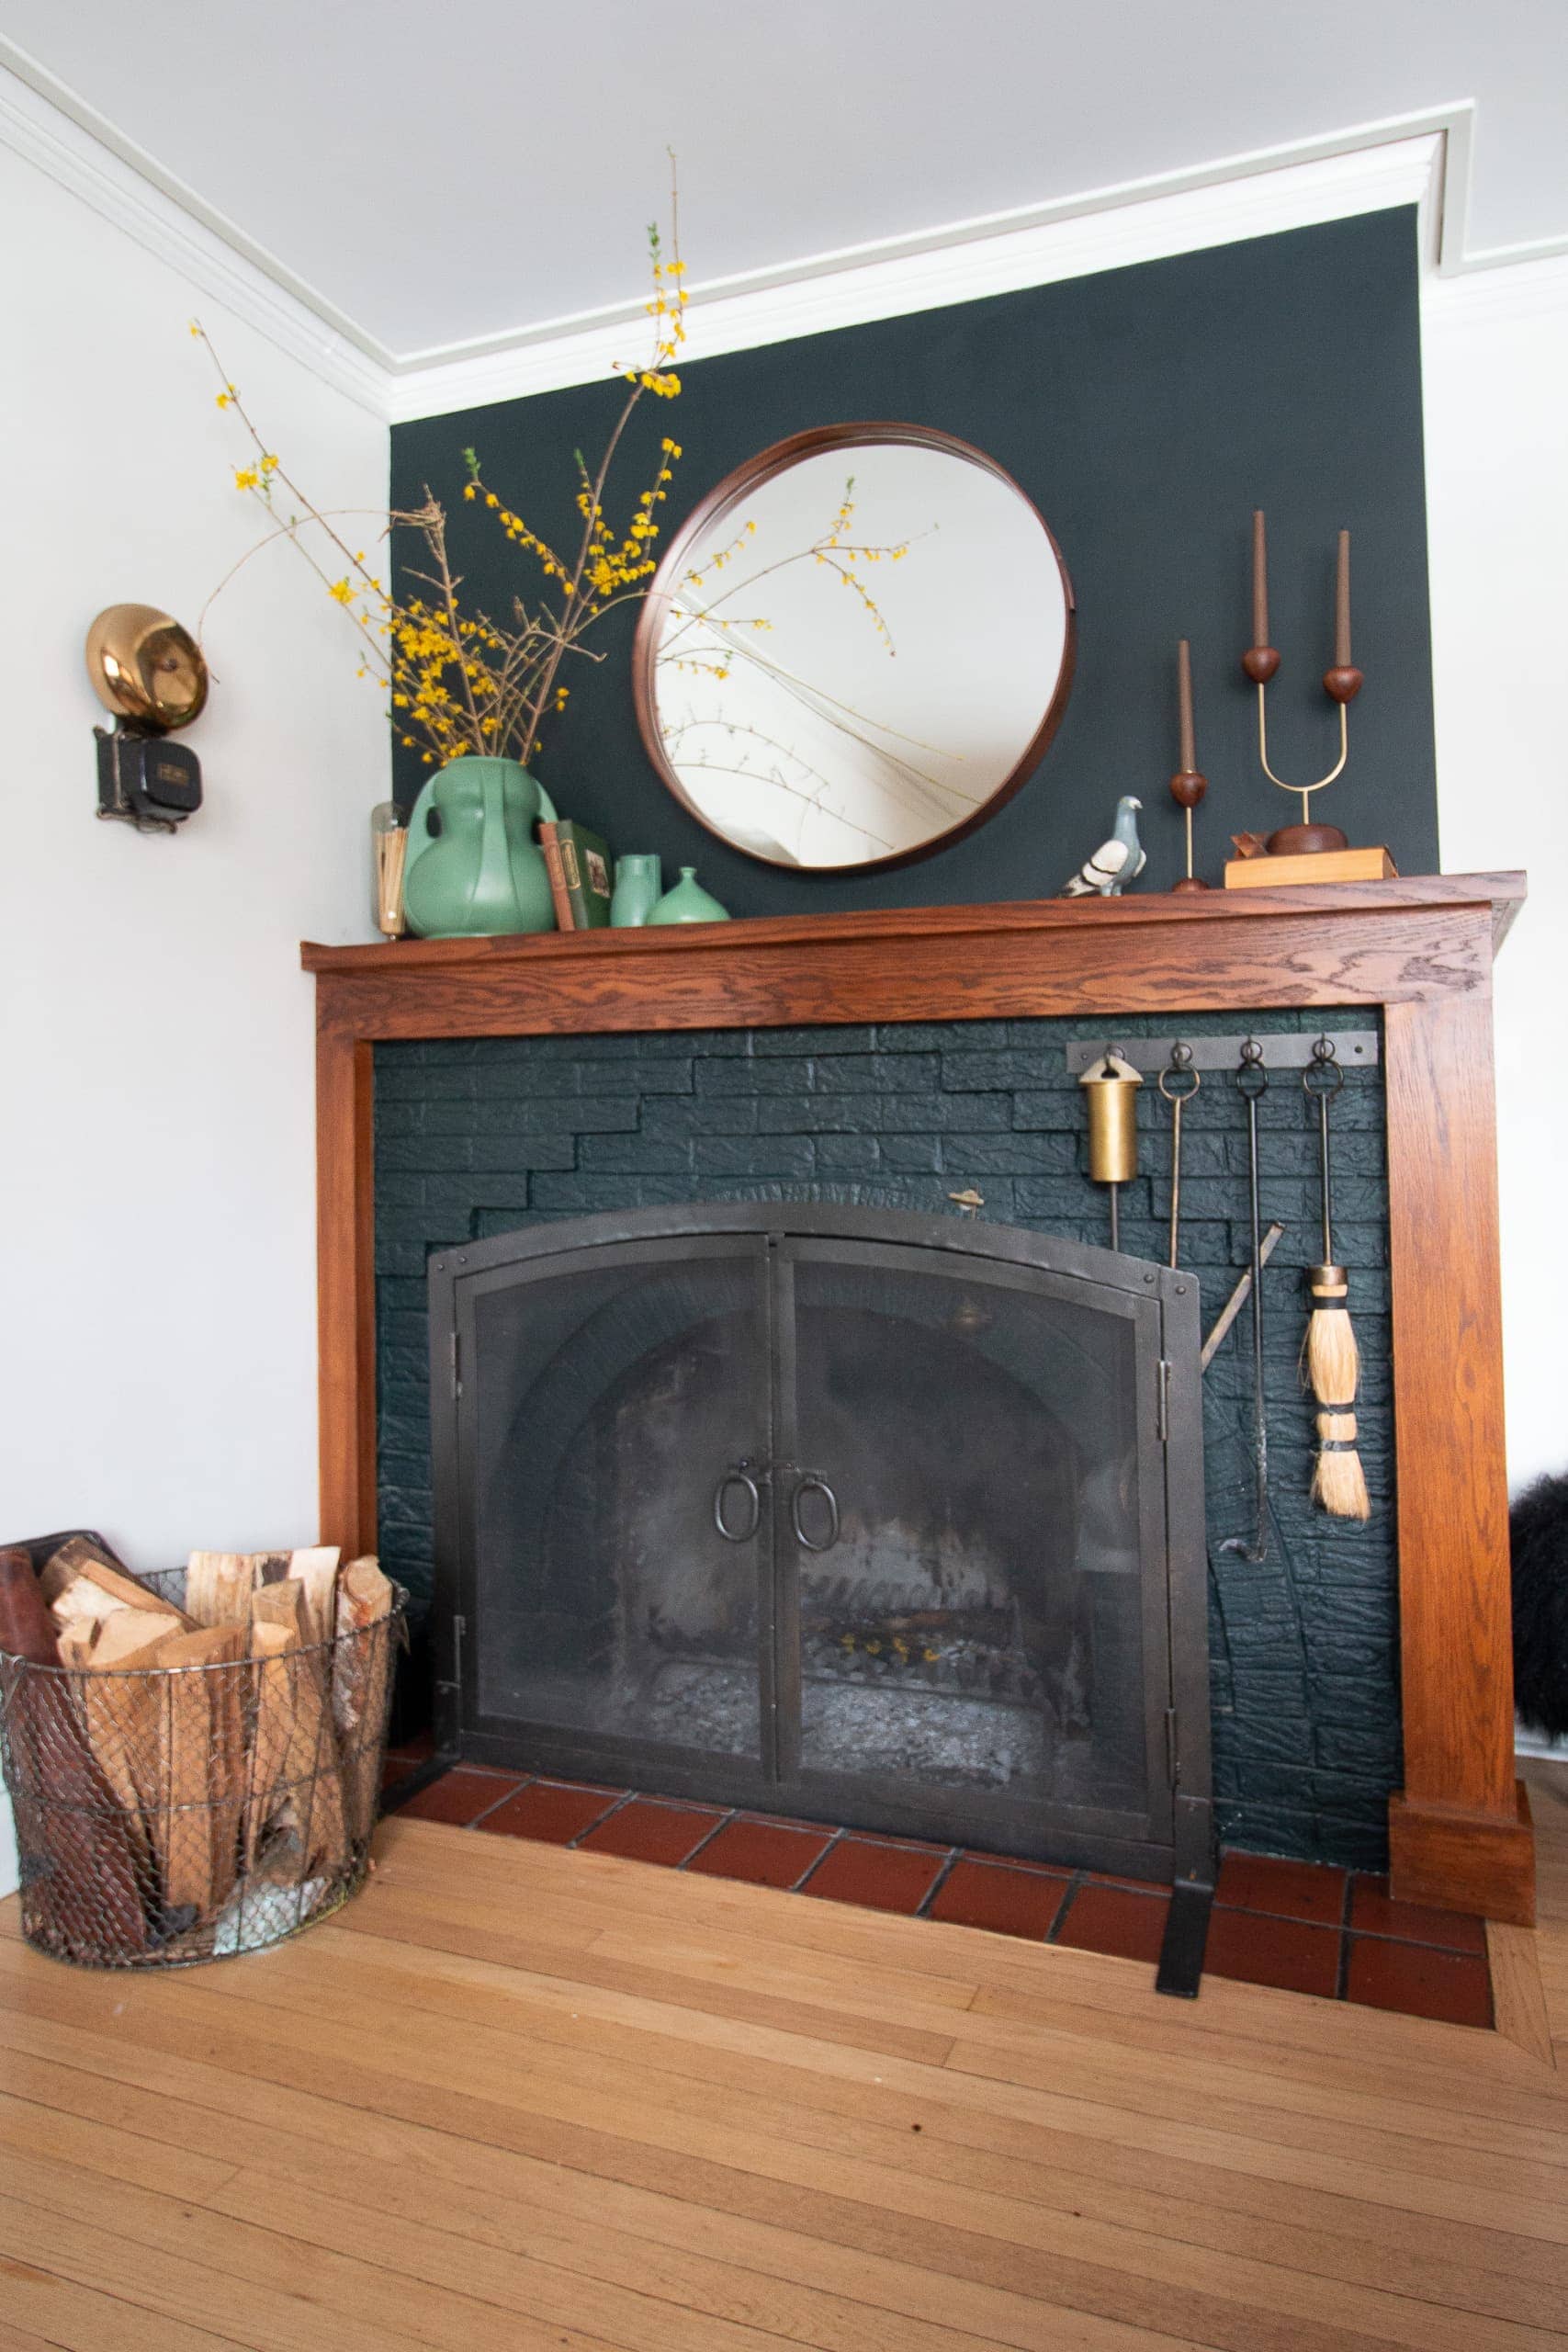 Tips to style a fireplace